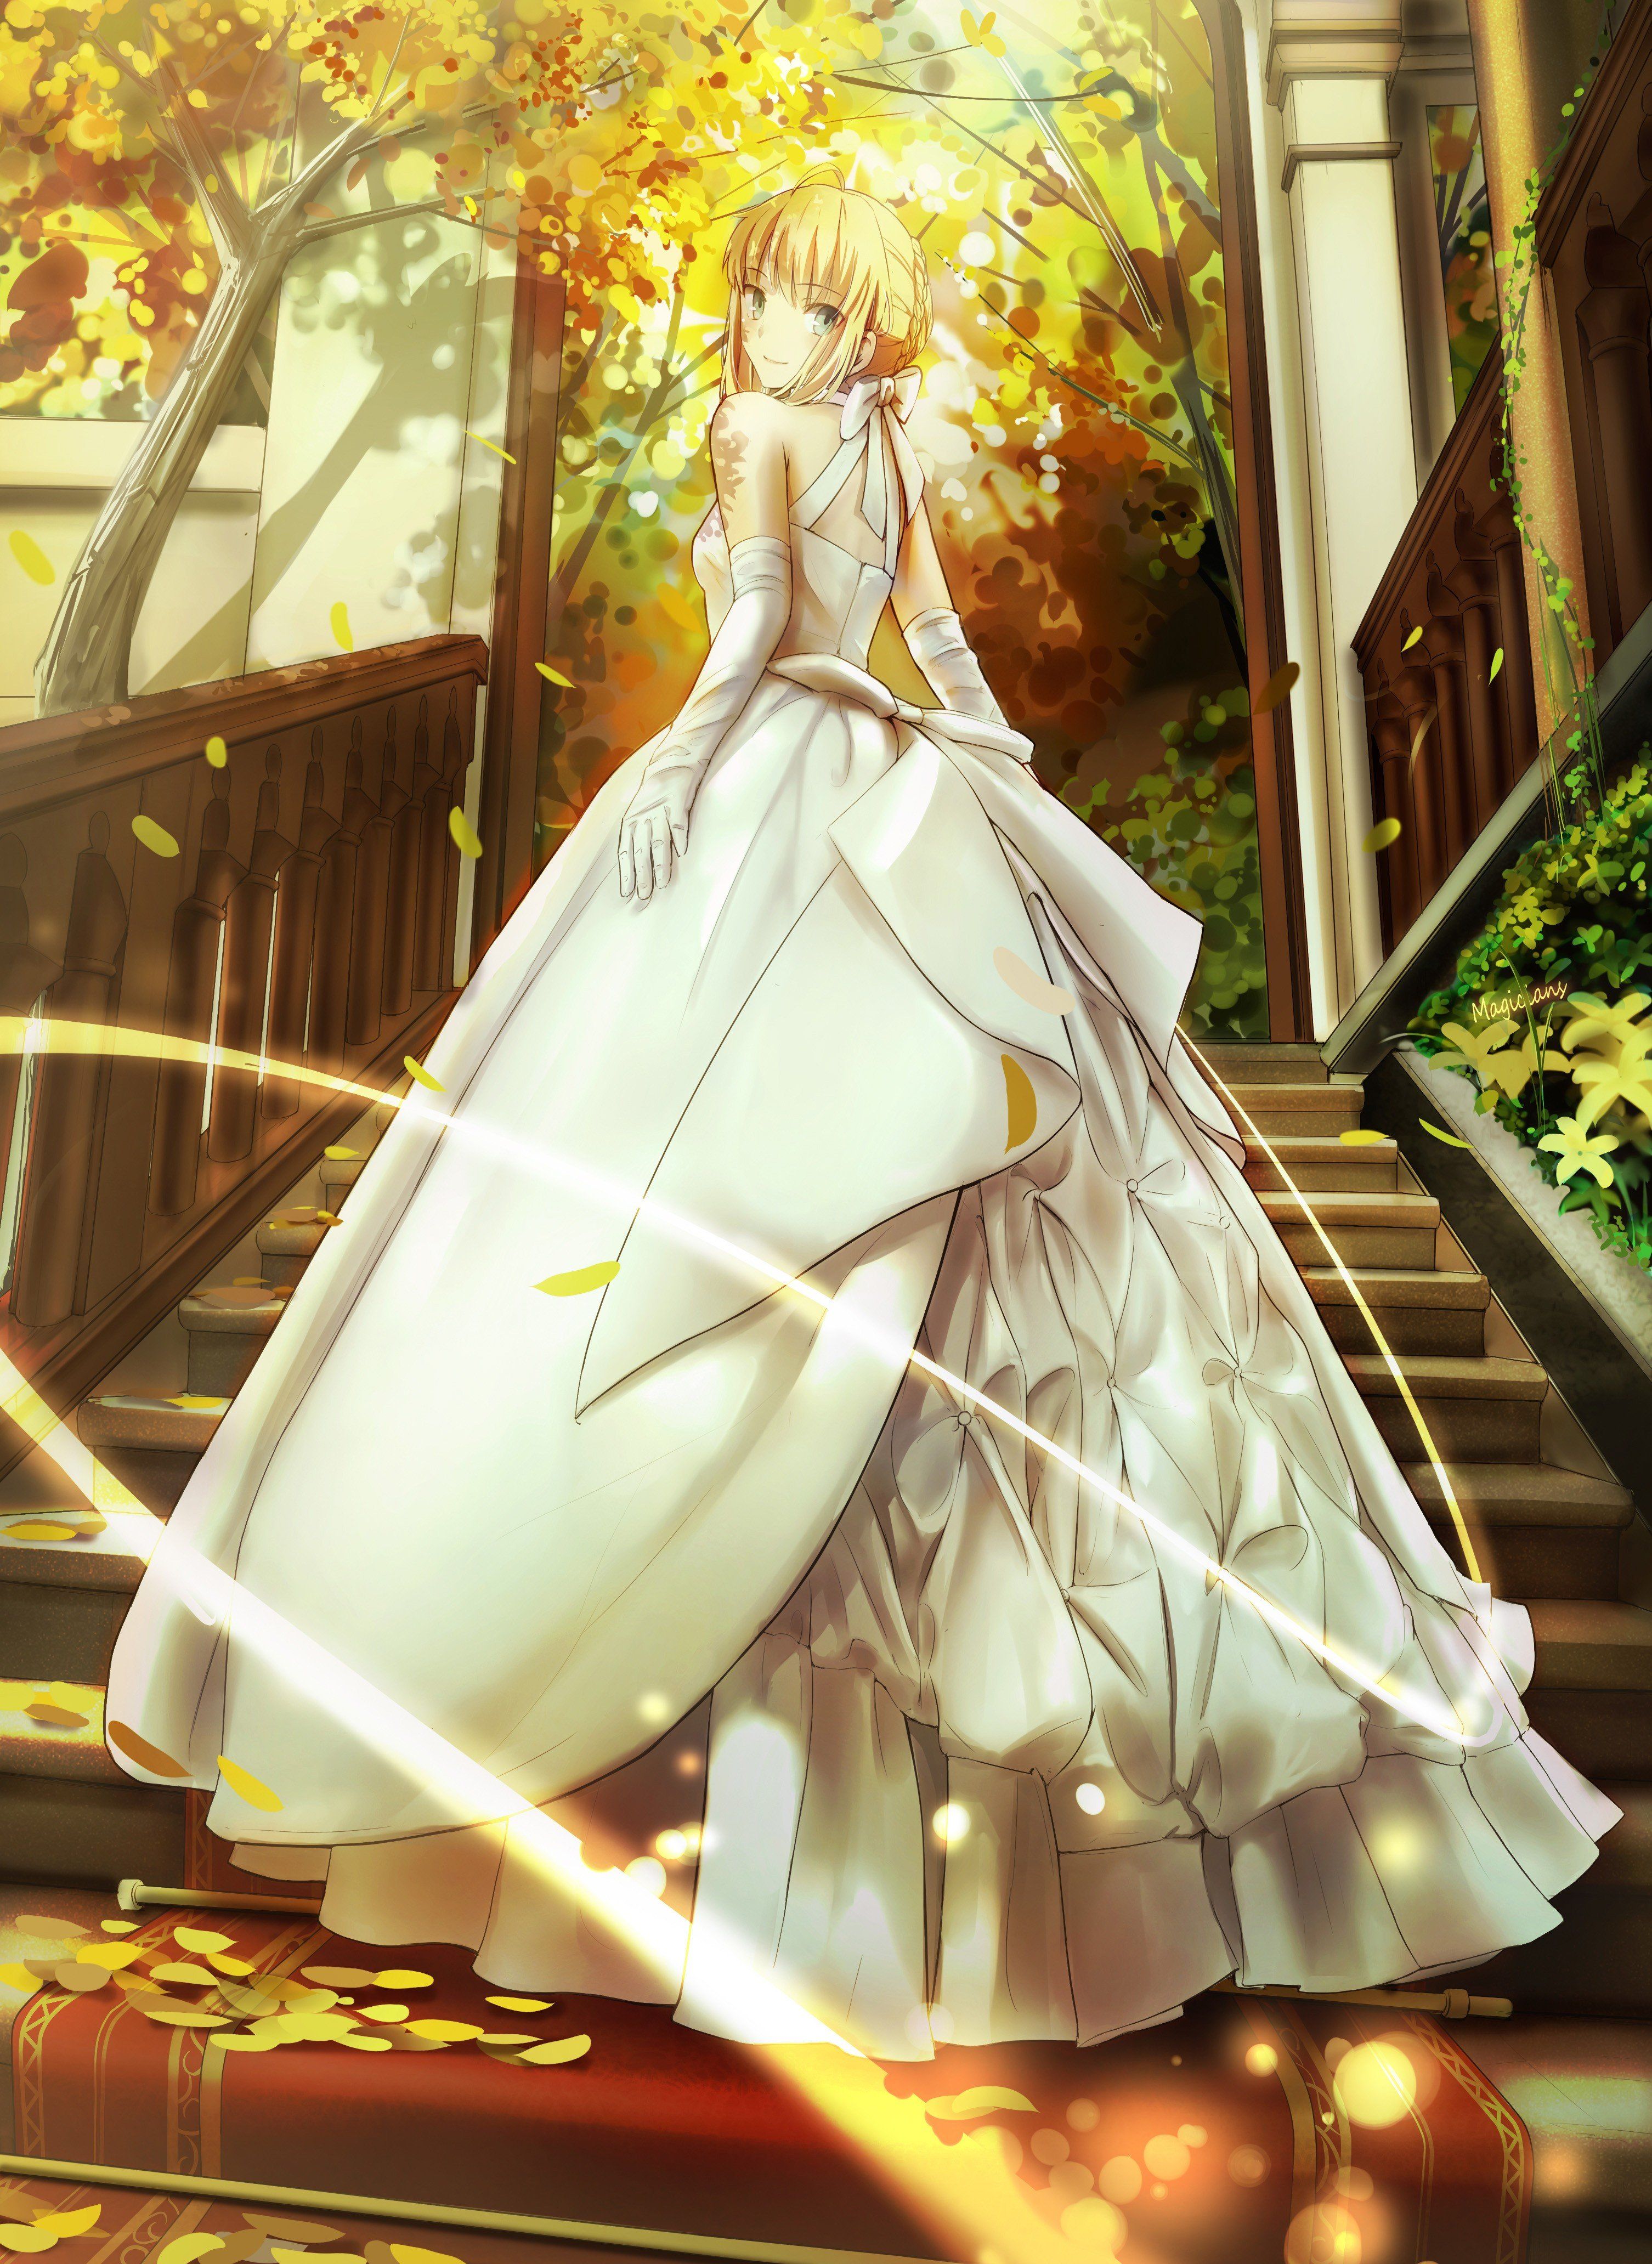 Saber, Dress, Anime, Fate Stay Night, Saber Lily, Wedding dress, Ribbon, Braids, Stairs, Petals, Trees, Anime girls Wallpaper HD / Desktop and Mobile Background